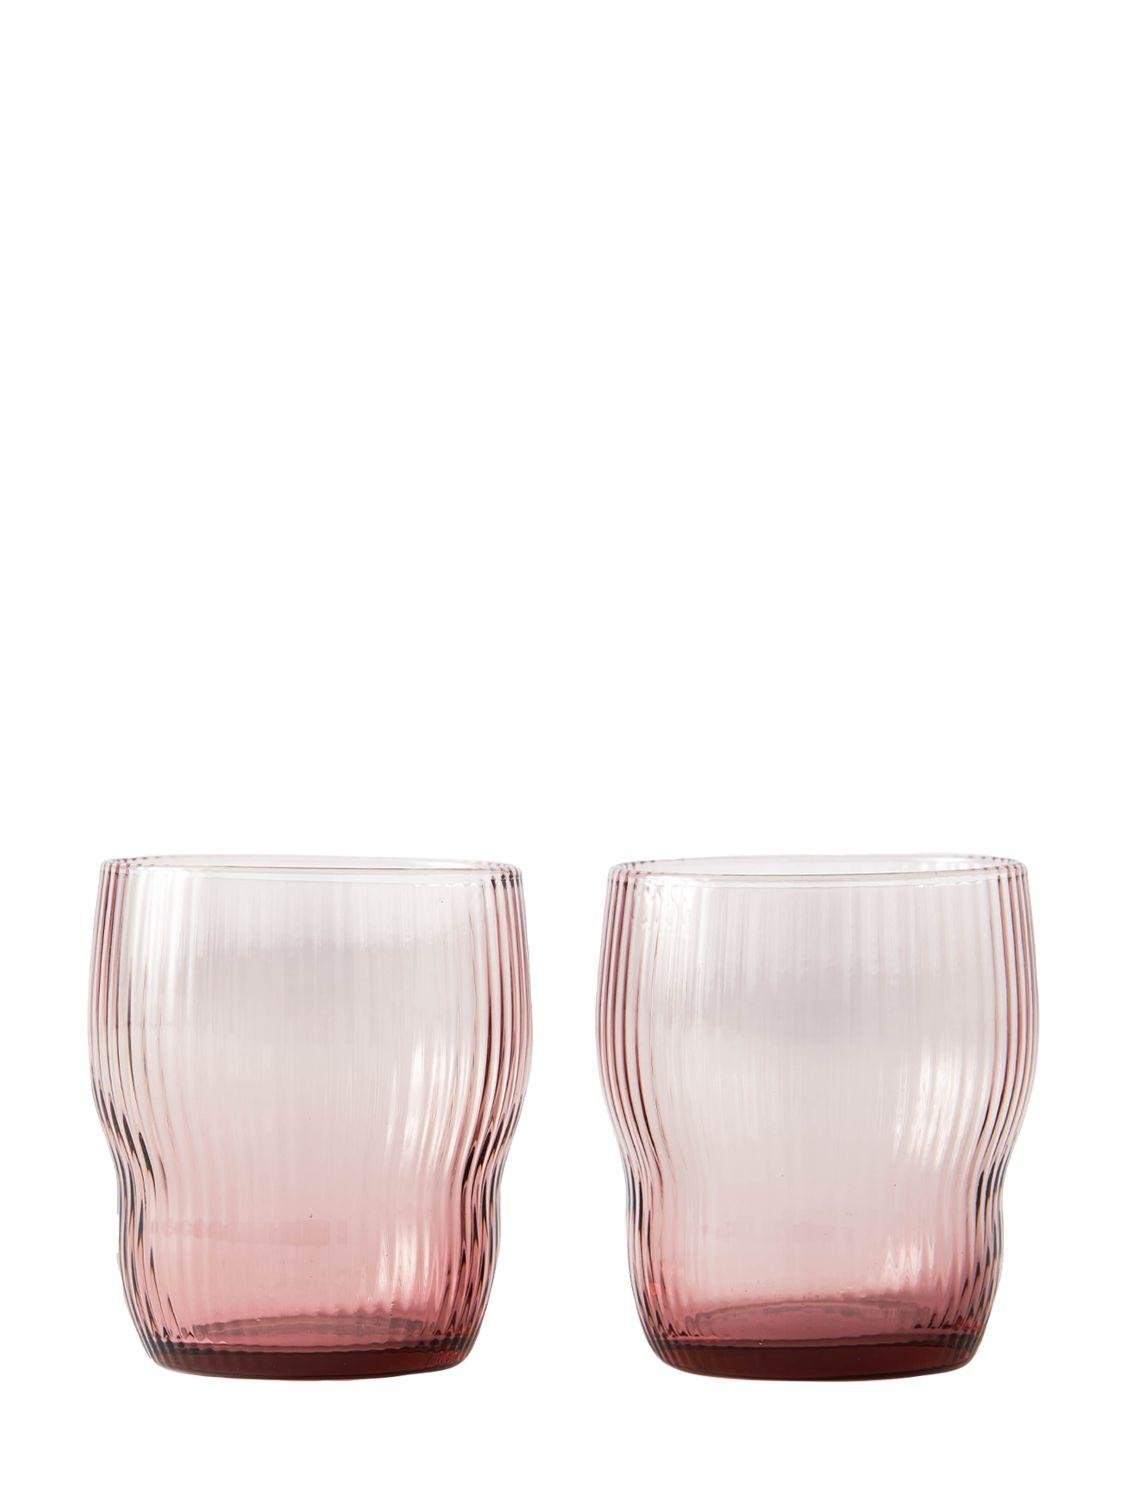 Set Of 2 Pum Tumblers by POLSPOTTEN